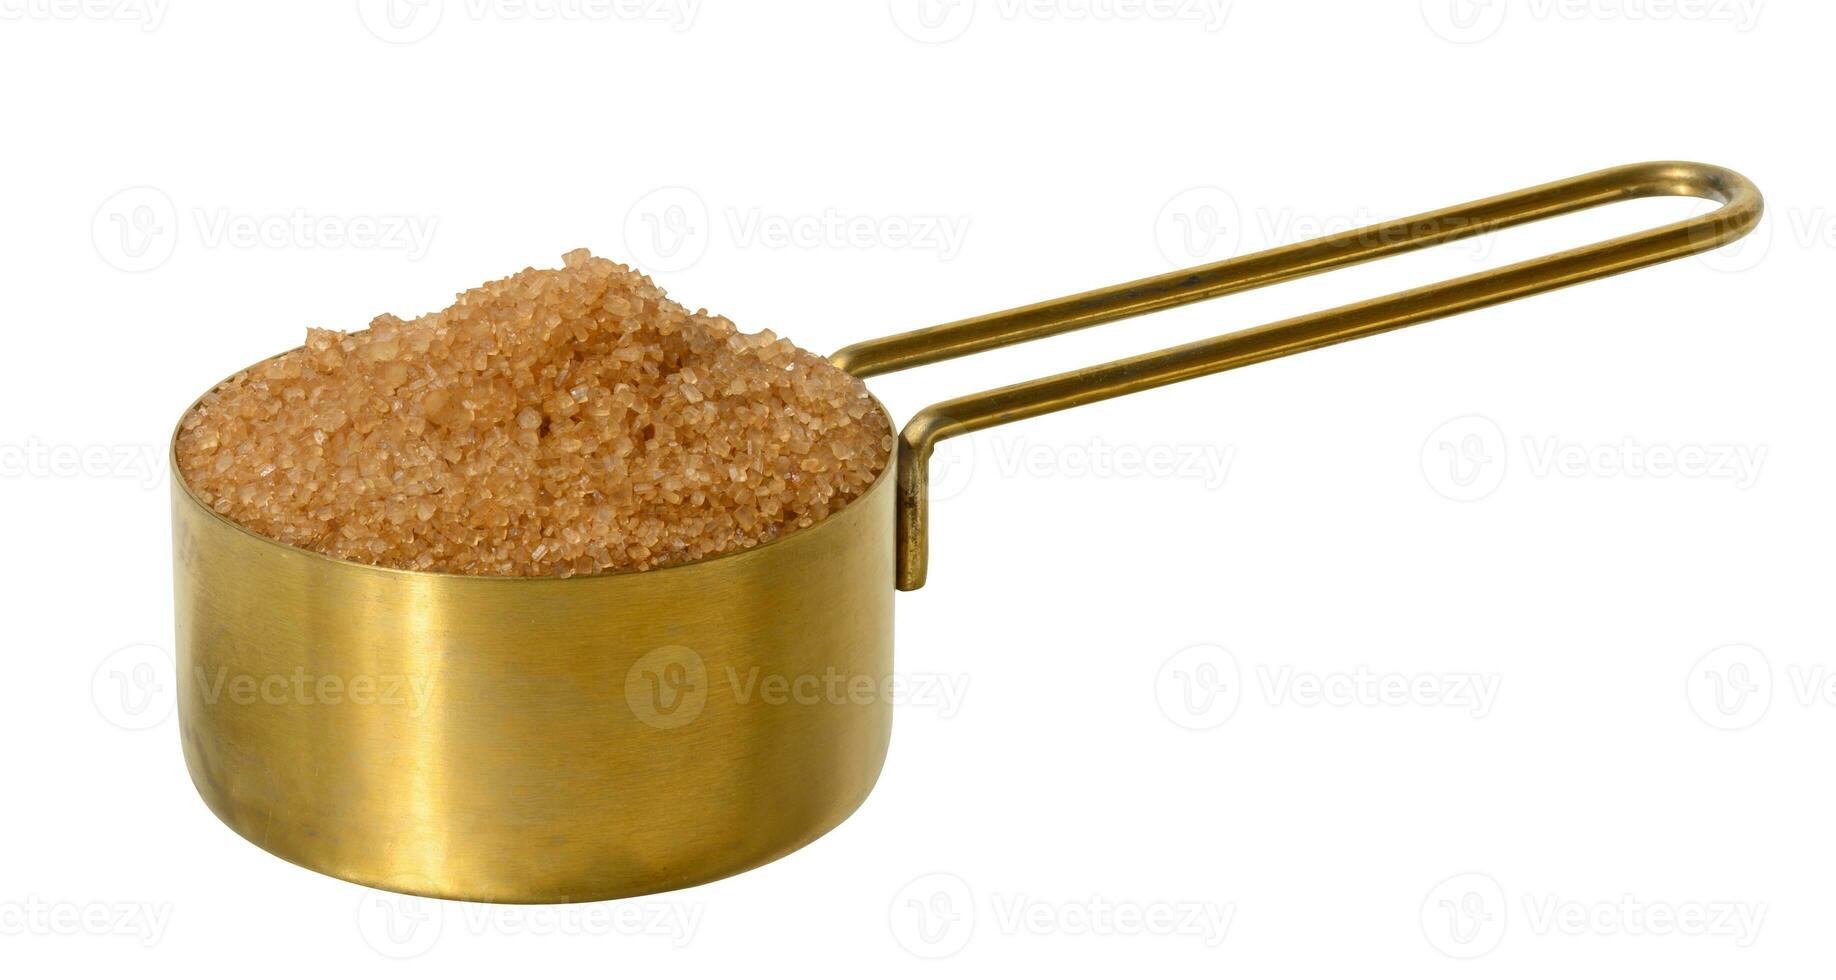 Brown cane sugar granules in a metal bowl on a white isolated background photo